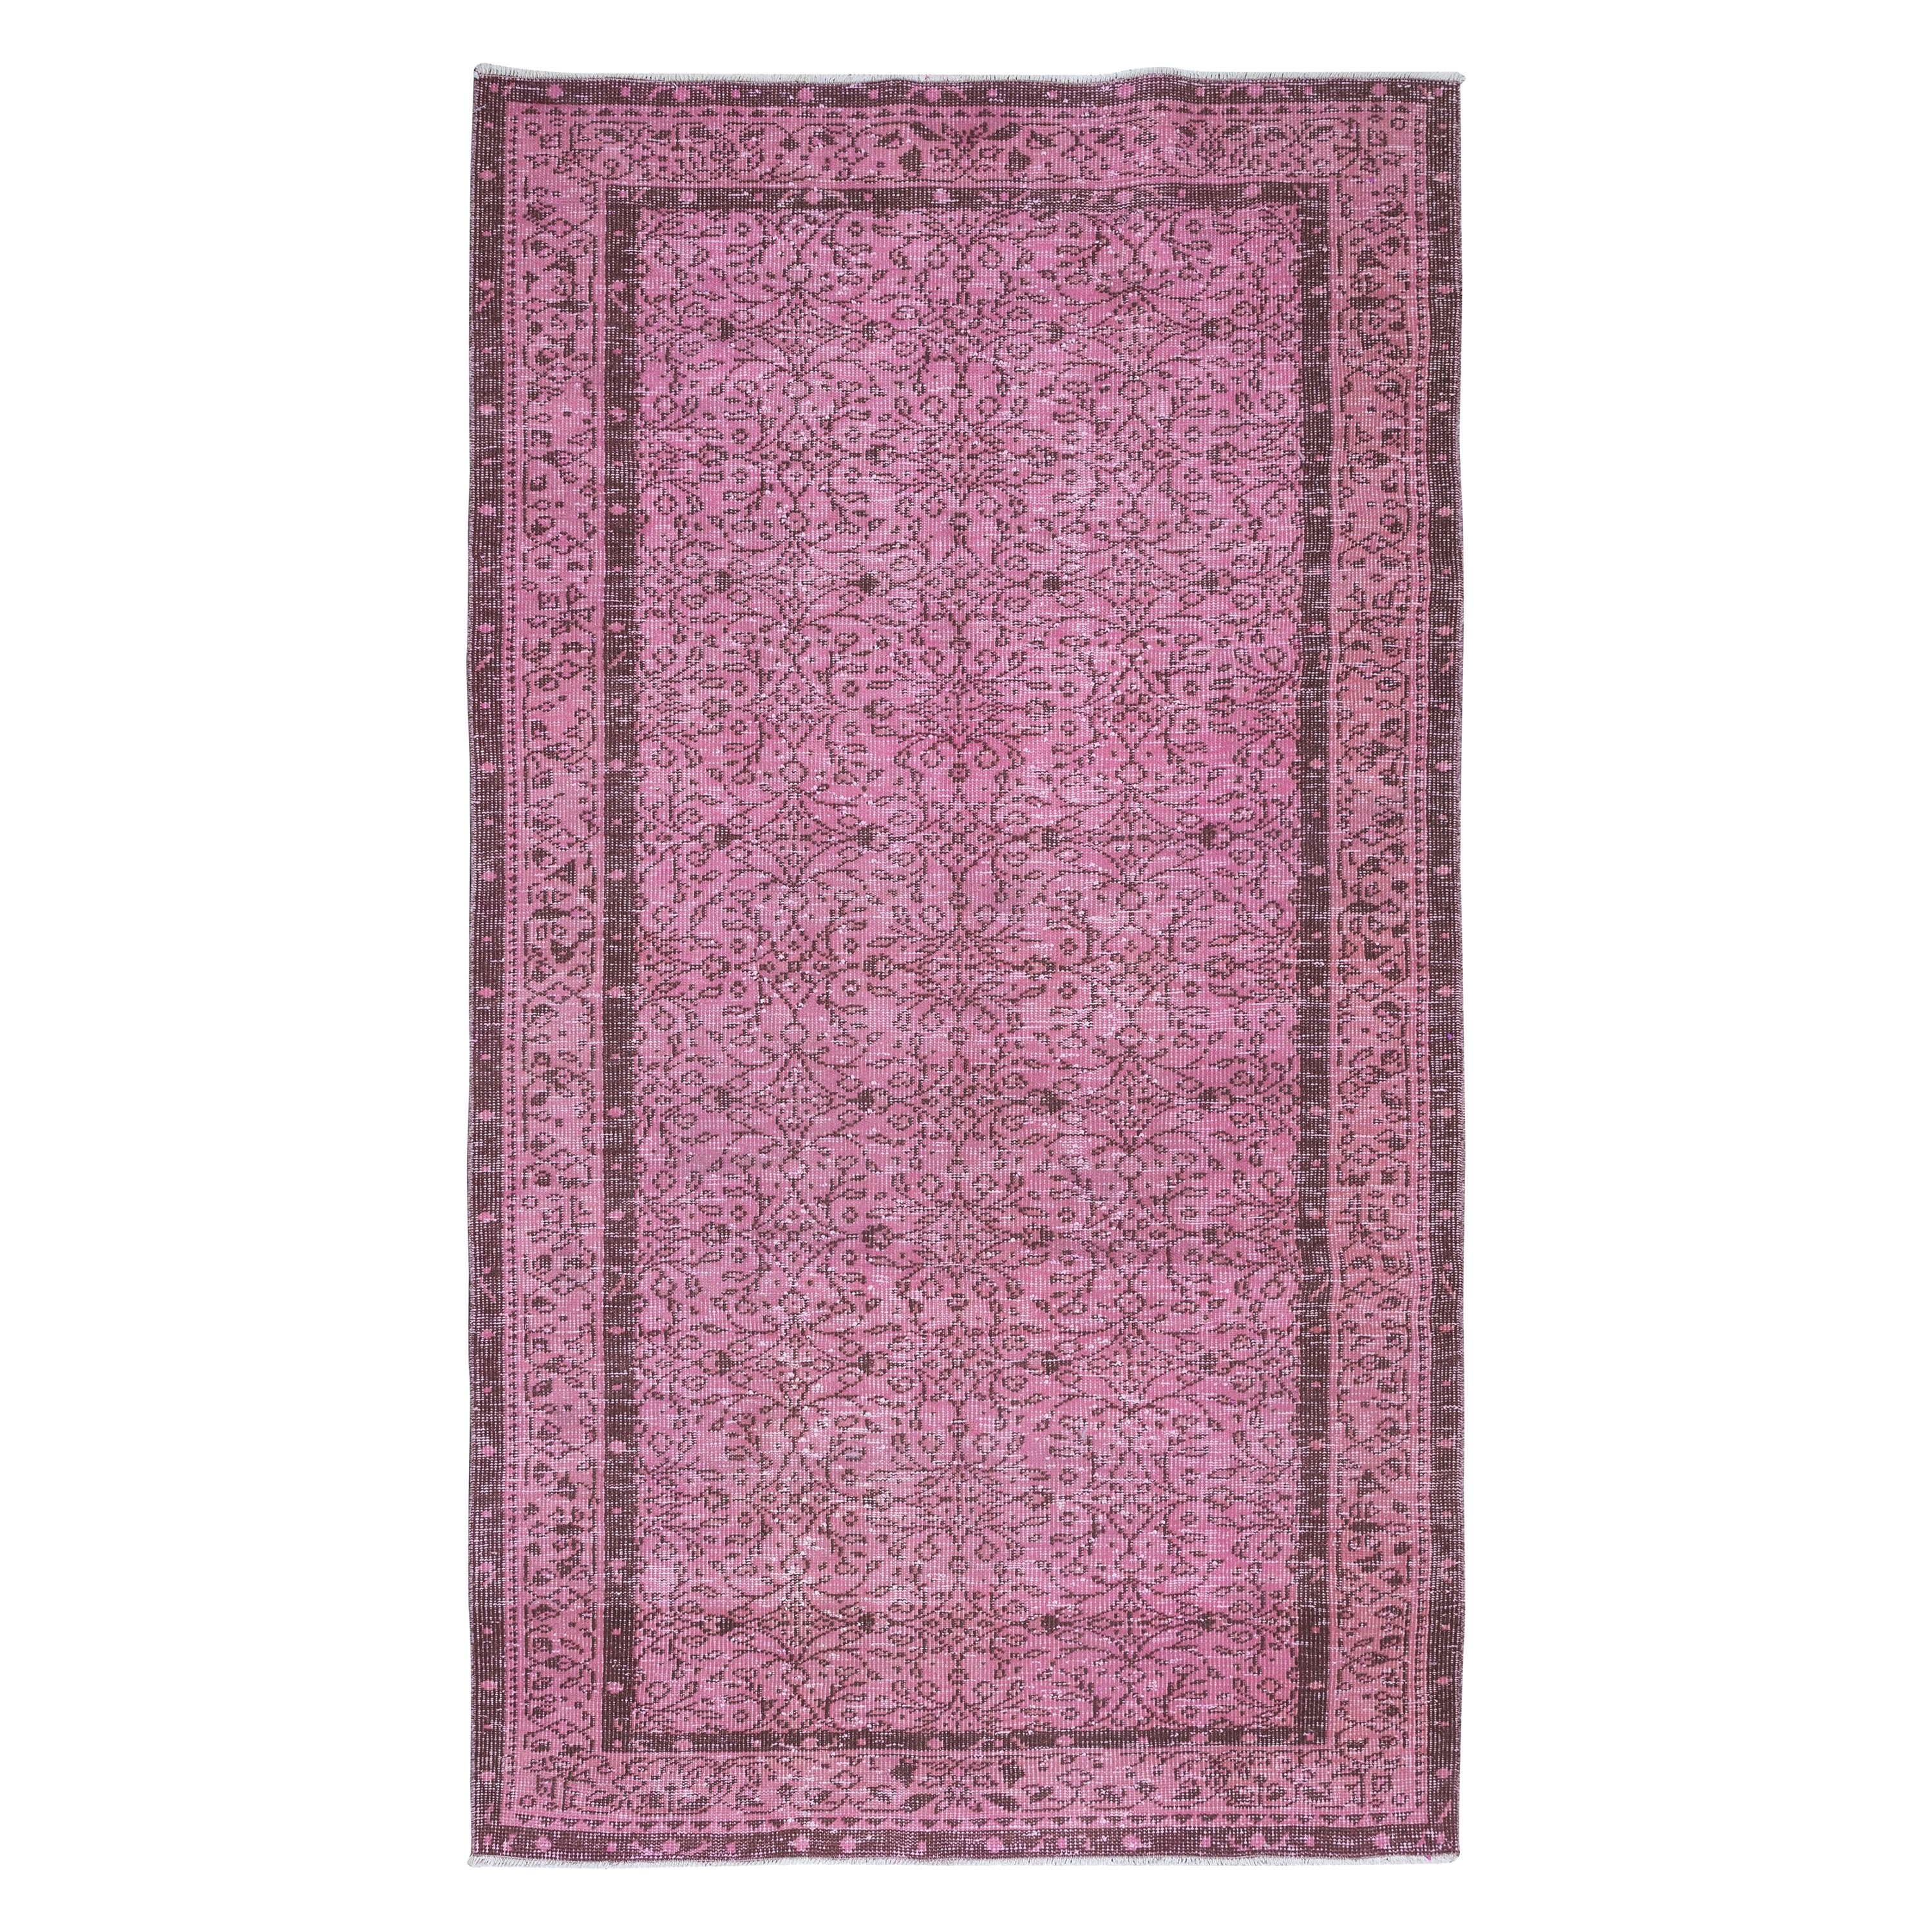 5.2x9 Ft Hand-Made Turkish Area Rug in Light Pink, Modern Wool and Cotton Carpet For Sale